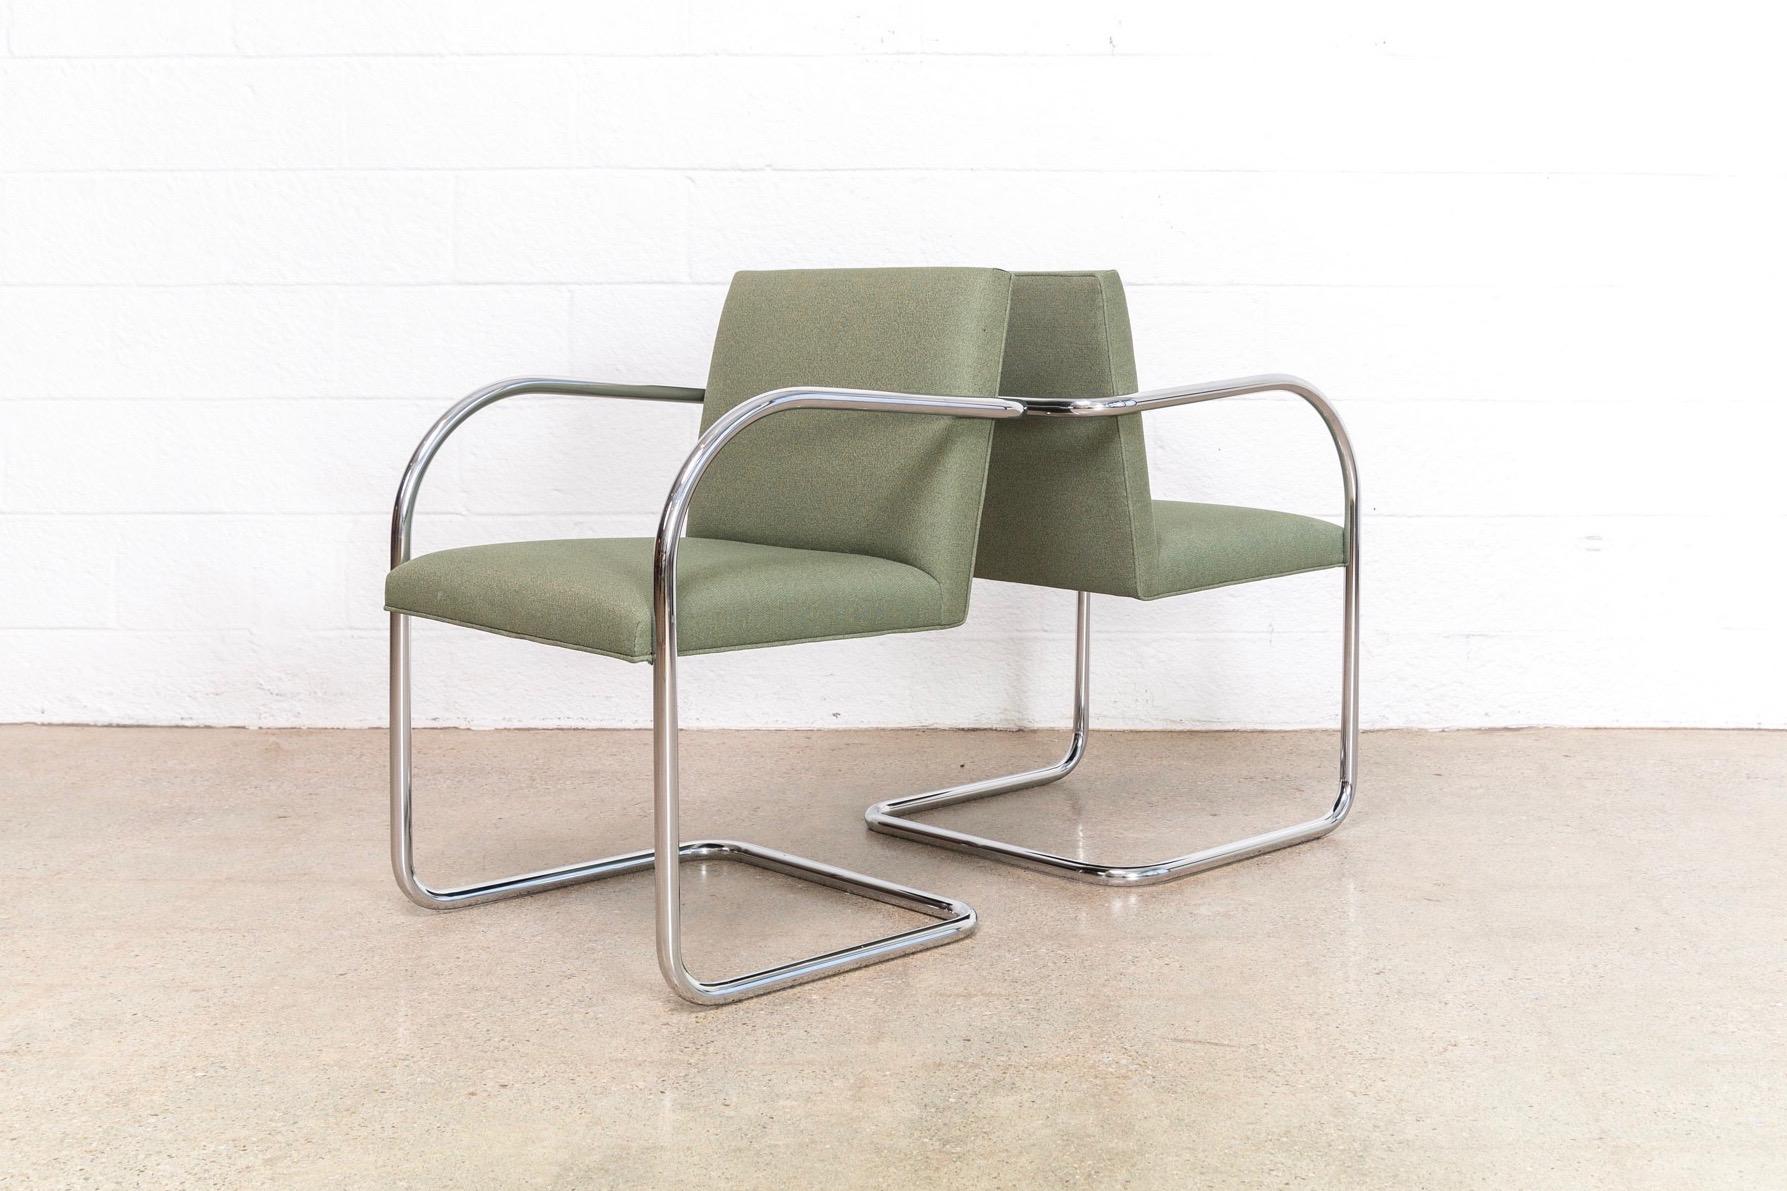 Steel Mies van der Rohe Green Brno Chrome Cantilever Dining Chairs, Set of 4 For Sale